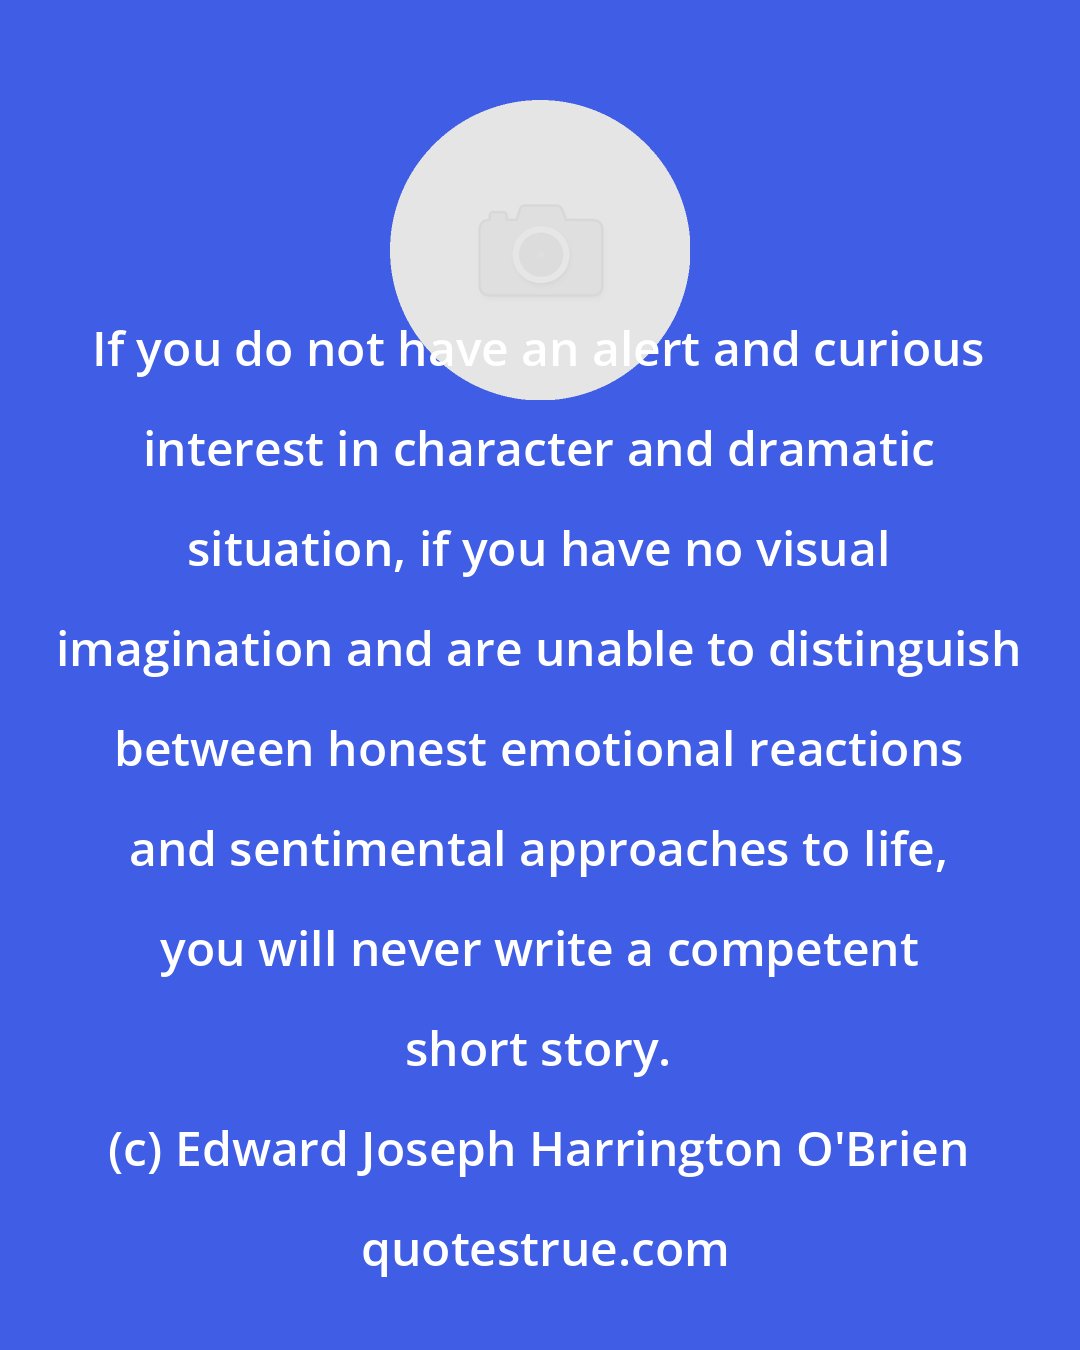 Edward Joseph Harrington O'Brien: If you do not have an alert and curious interest in character and dramatic situation, if you have no visual imagination and are unable to distinguish between honest emotional reactions and sentimental approaches to life, you will never write a competent short story.